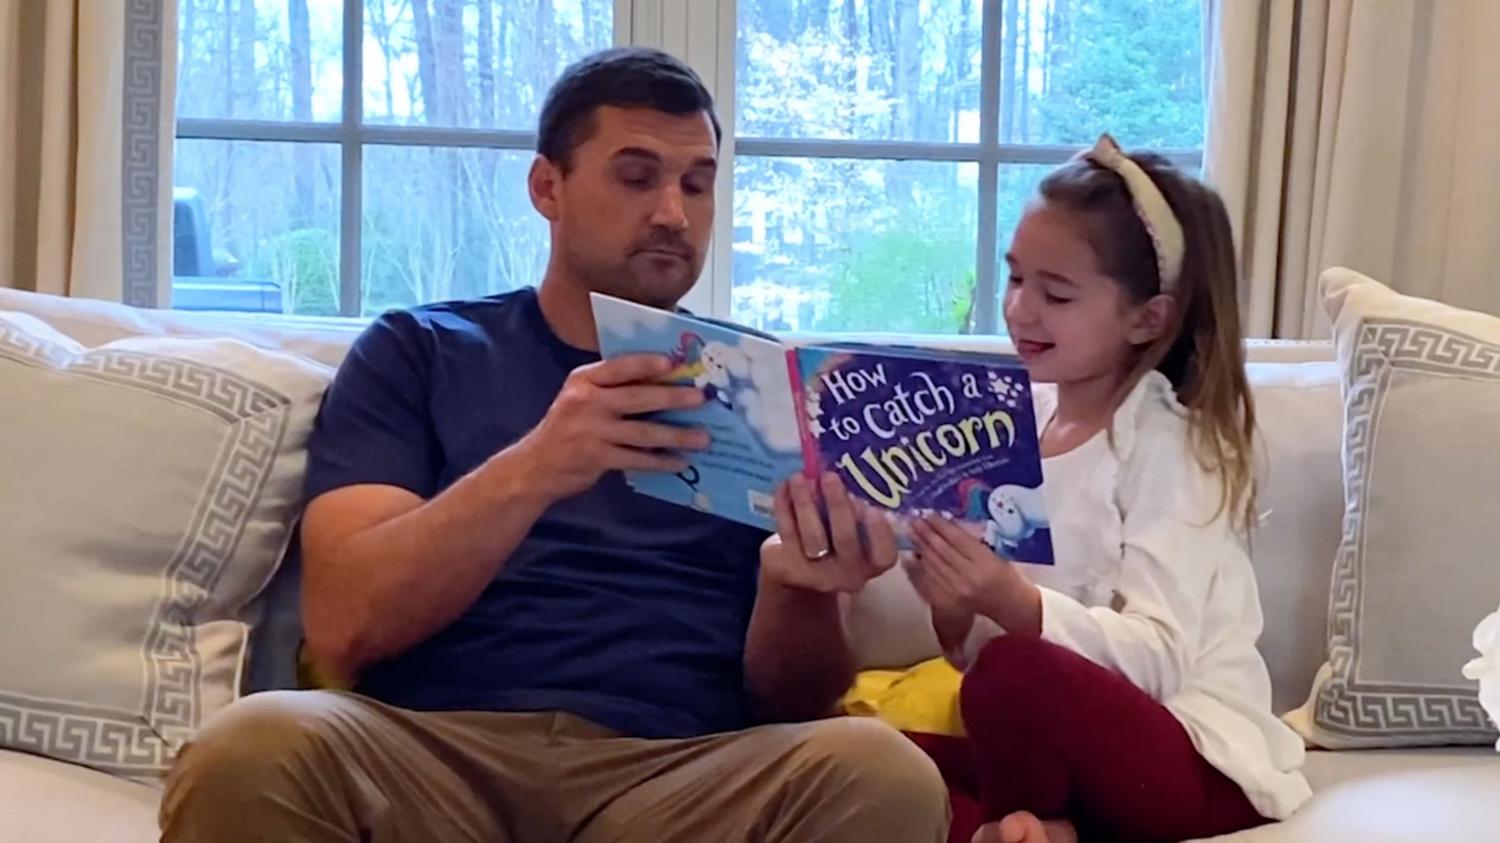 Storytime with Ryan Zimmerman